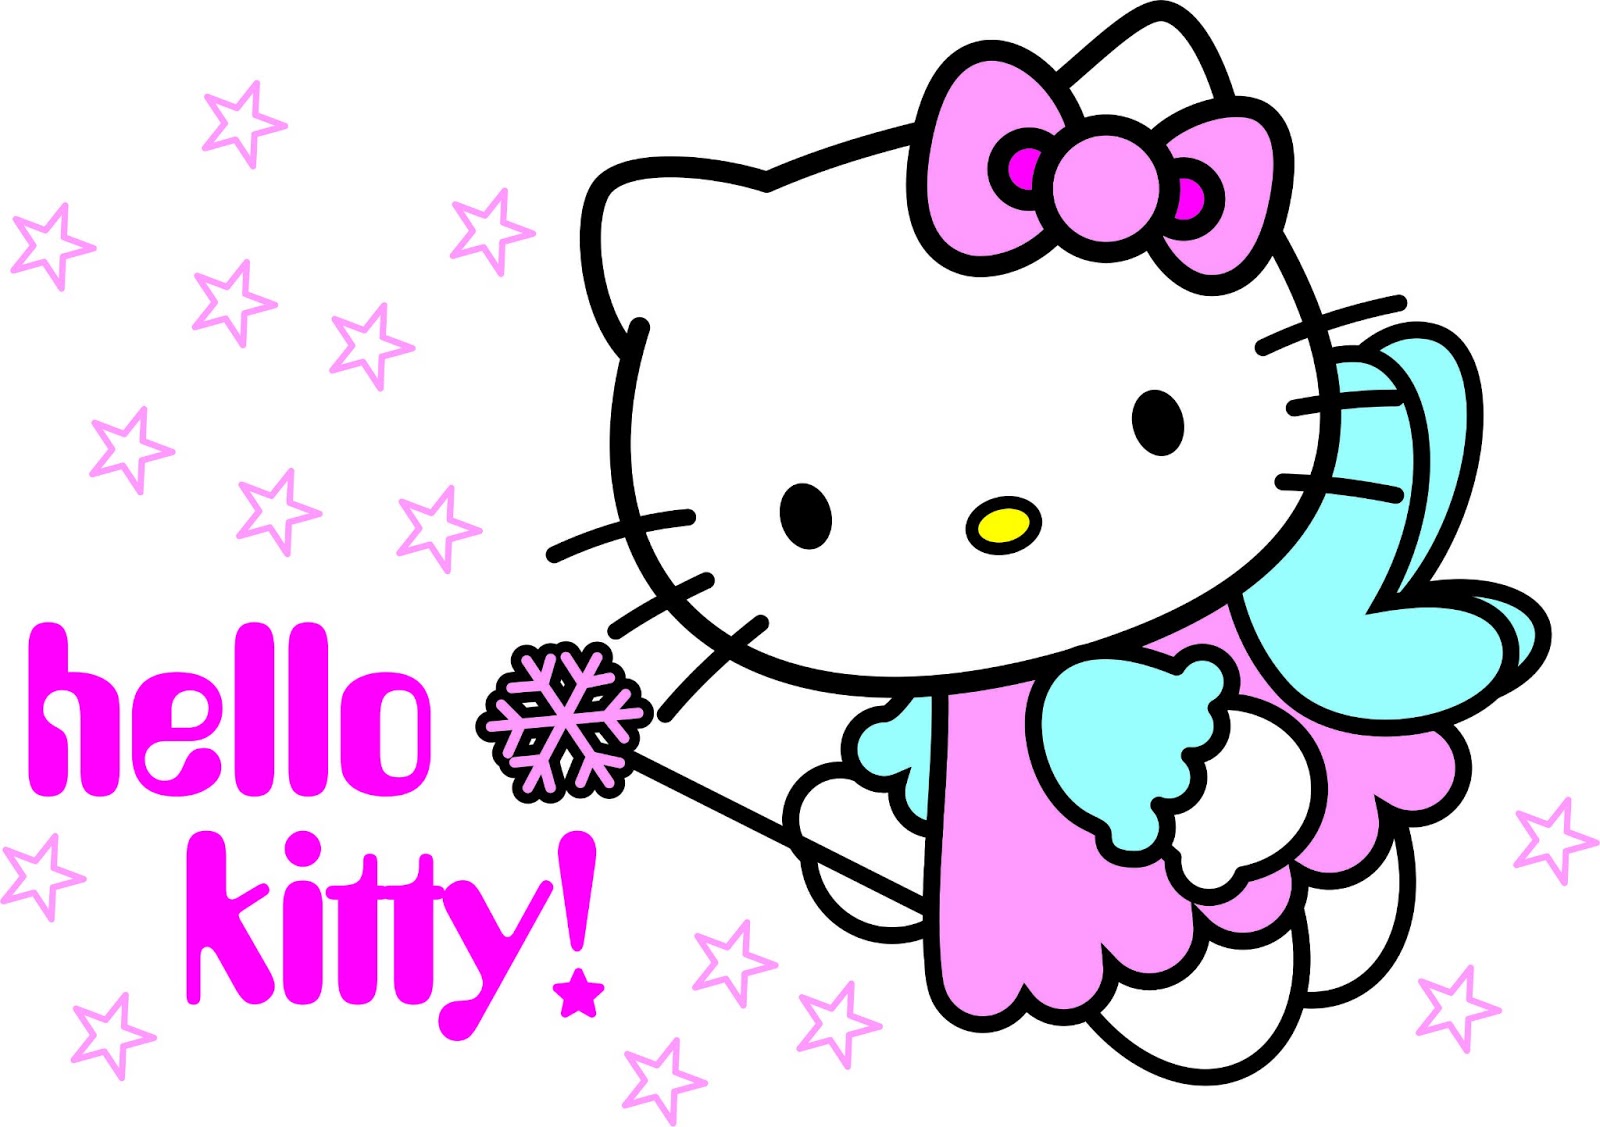 hello kitty clipart images - photo #22